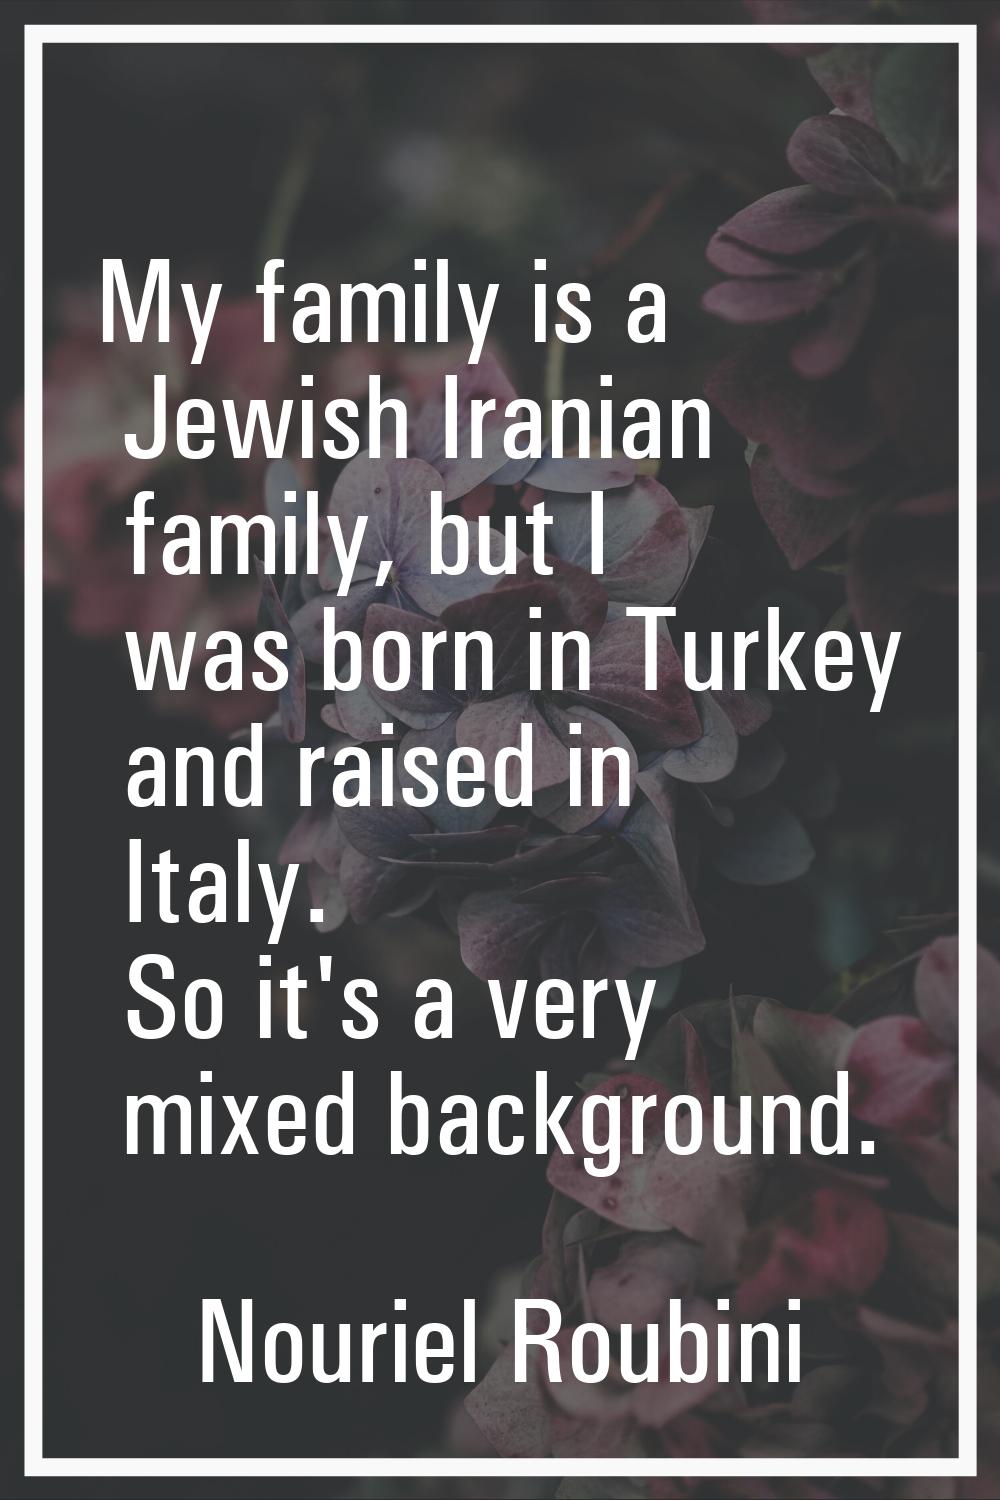 My family is a Jewish Iranian family, but I was born in Turkey and raised in Italy. So it's a very 